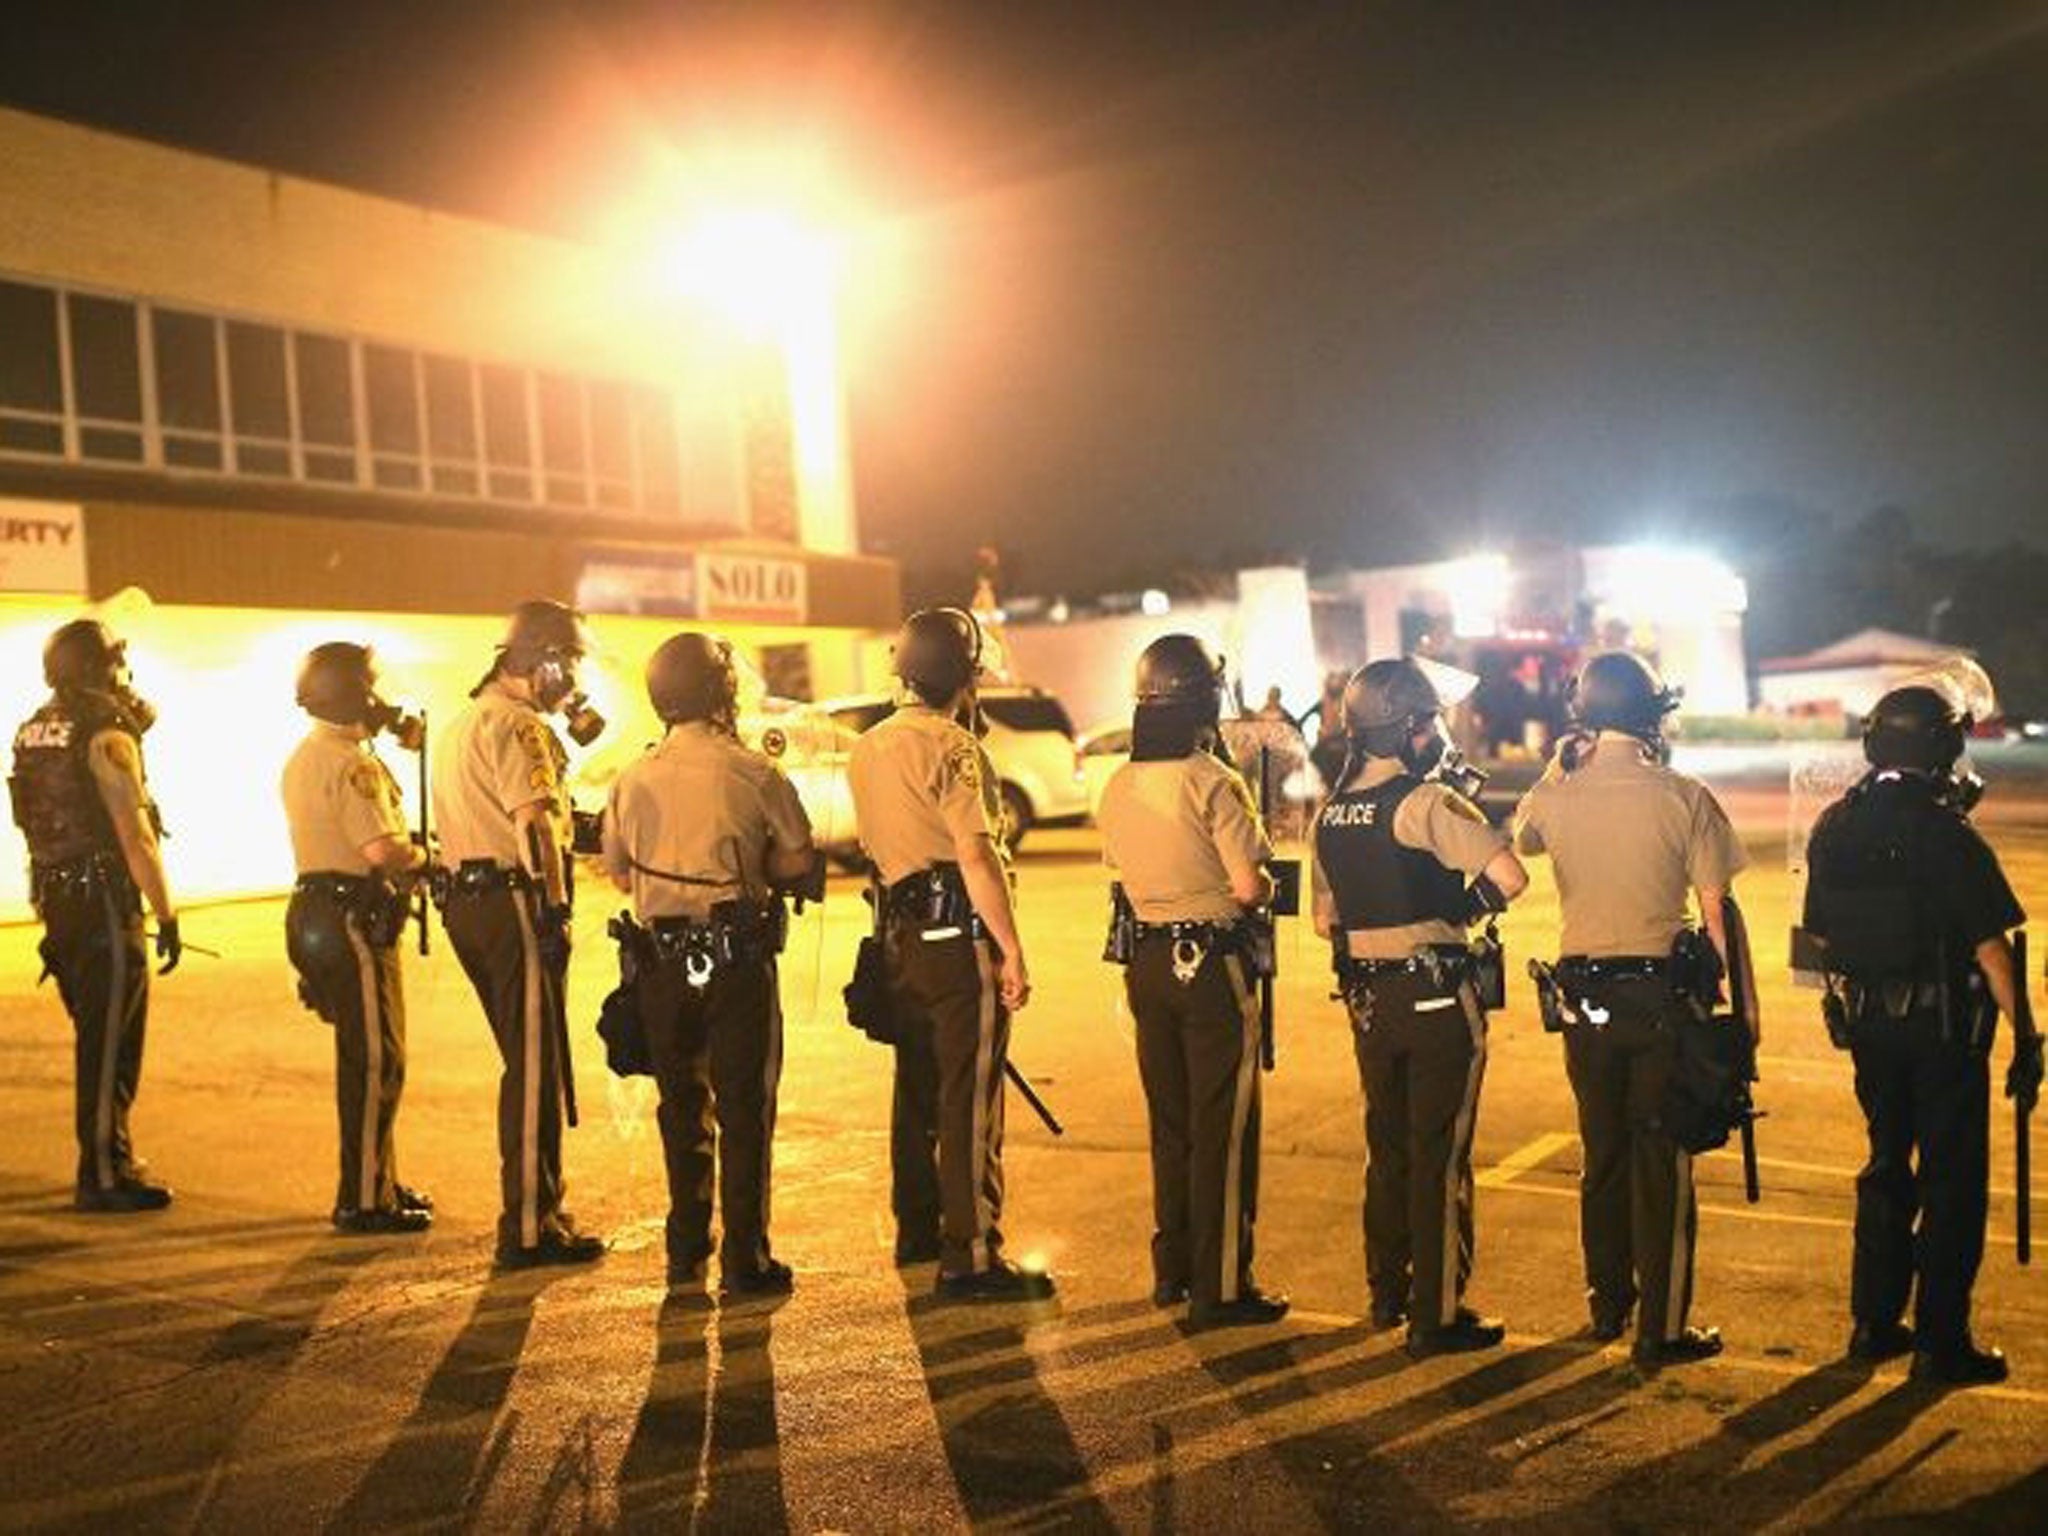 Police advance on demonstrators protesting the killing of teenager Michael Brown on August 17, 2014 in Ferguson, Missouri.